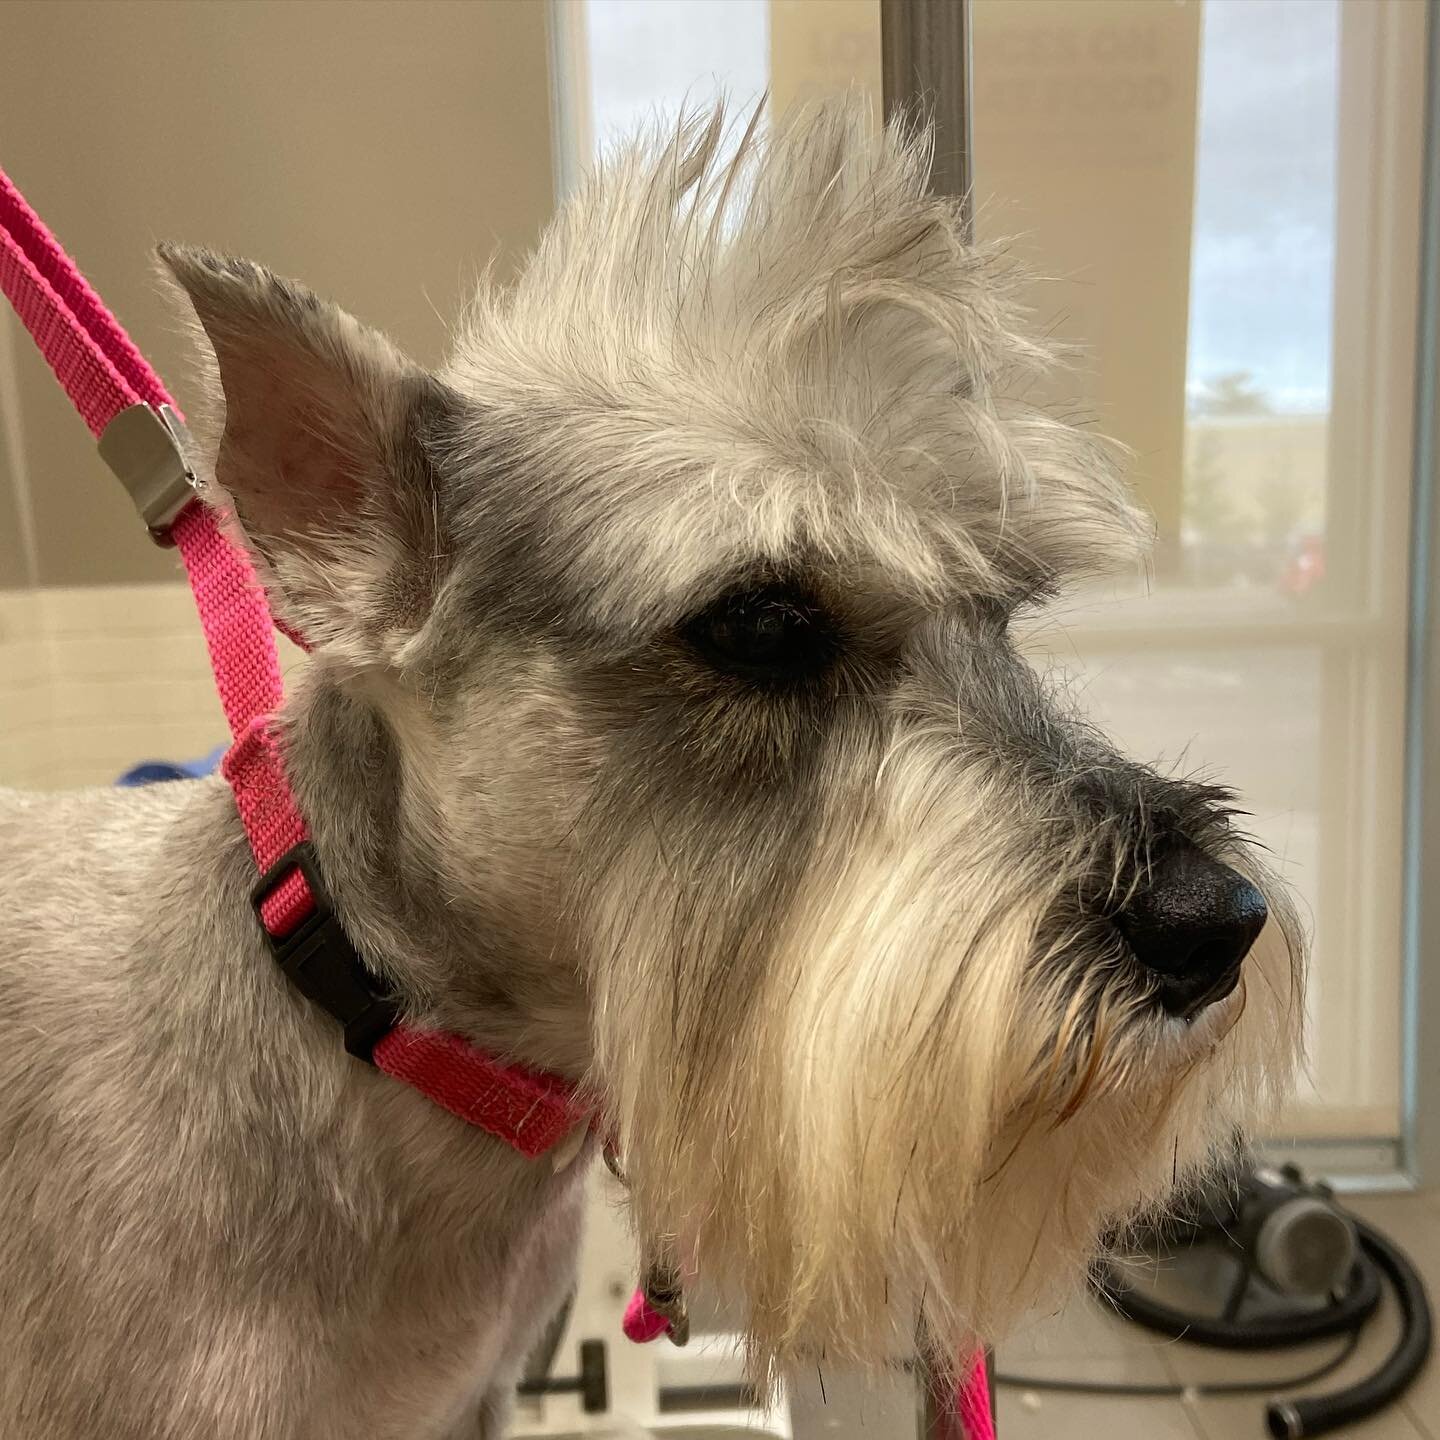 #Cuzzie got a shape up thanks to Tori @petco EHT. Monday through Thursday he is going to be showing it off with his brother #Primo the #miniatureschnauzer @cuzziespizzeriakitchen on #tennaveac #atlanticcity @northbeachac for lunch. Open everyday at 1